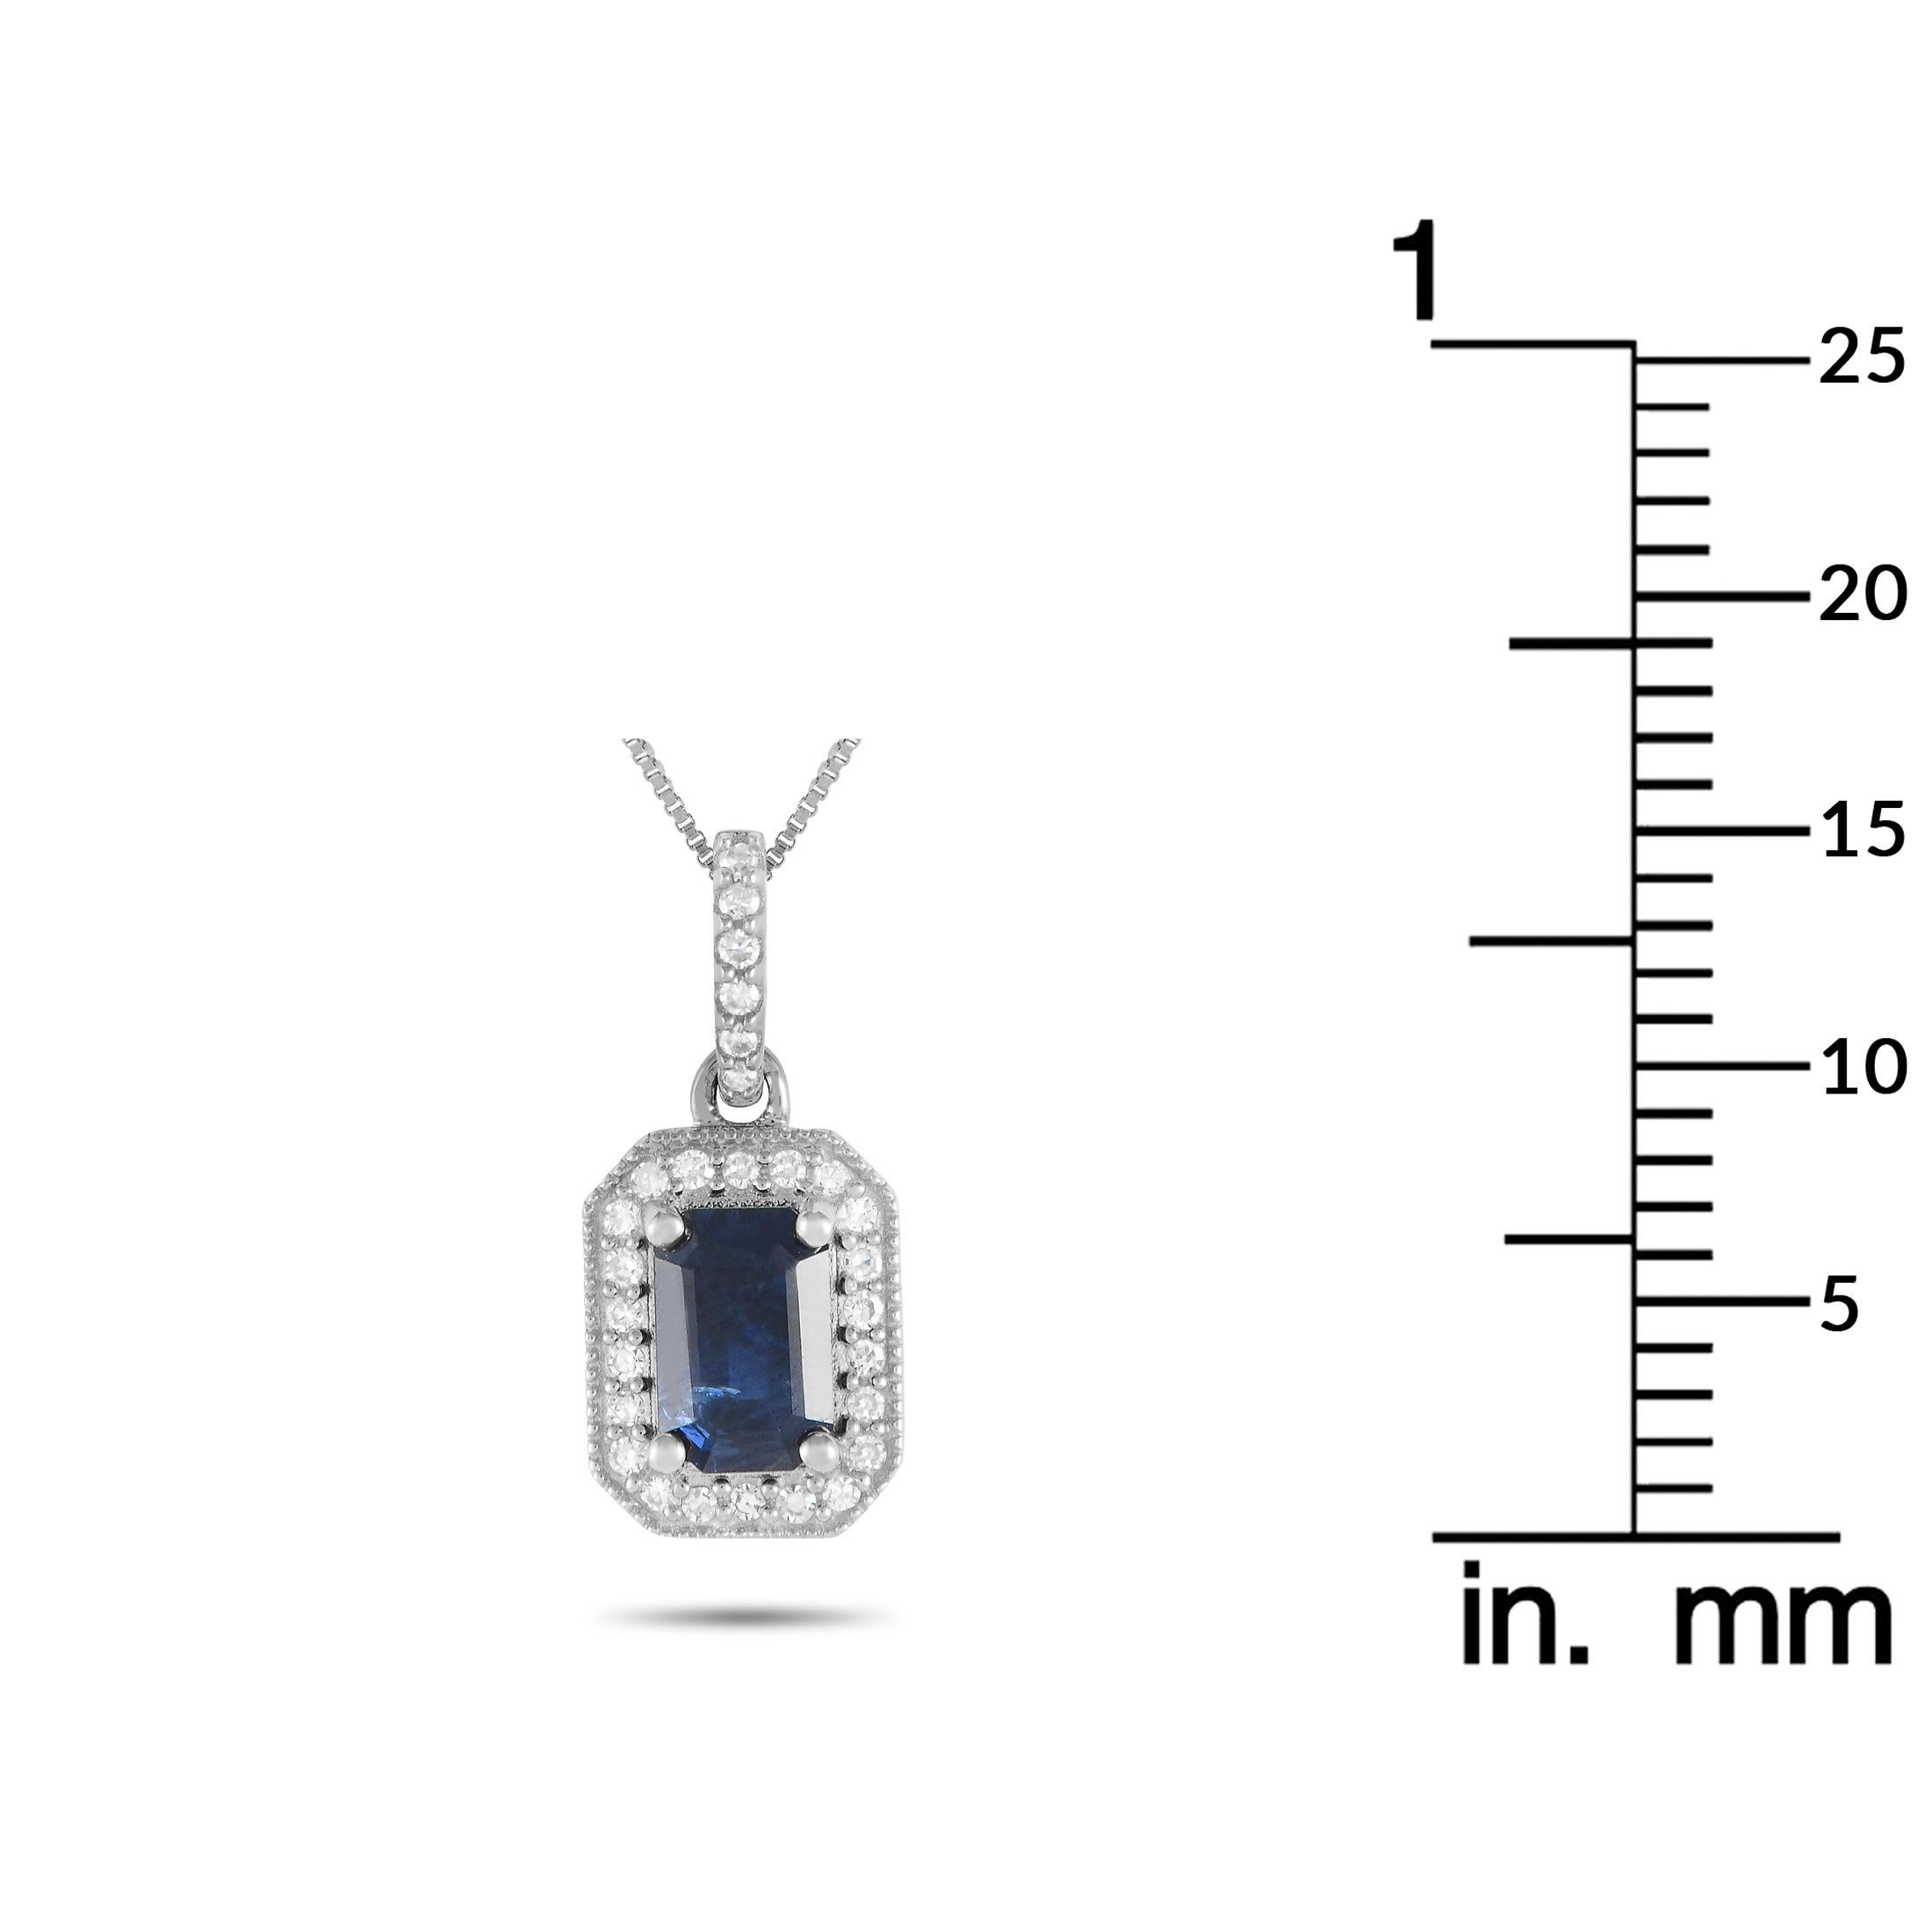 LB Exclusive 14K White Gold 0.10ct Diamond Pendant Necklace PD4-16050WSA In New Condition For Sale In Southampton, PA